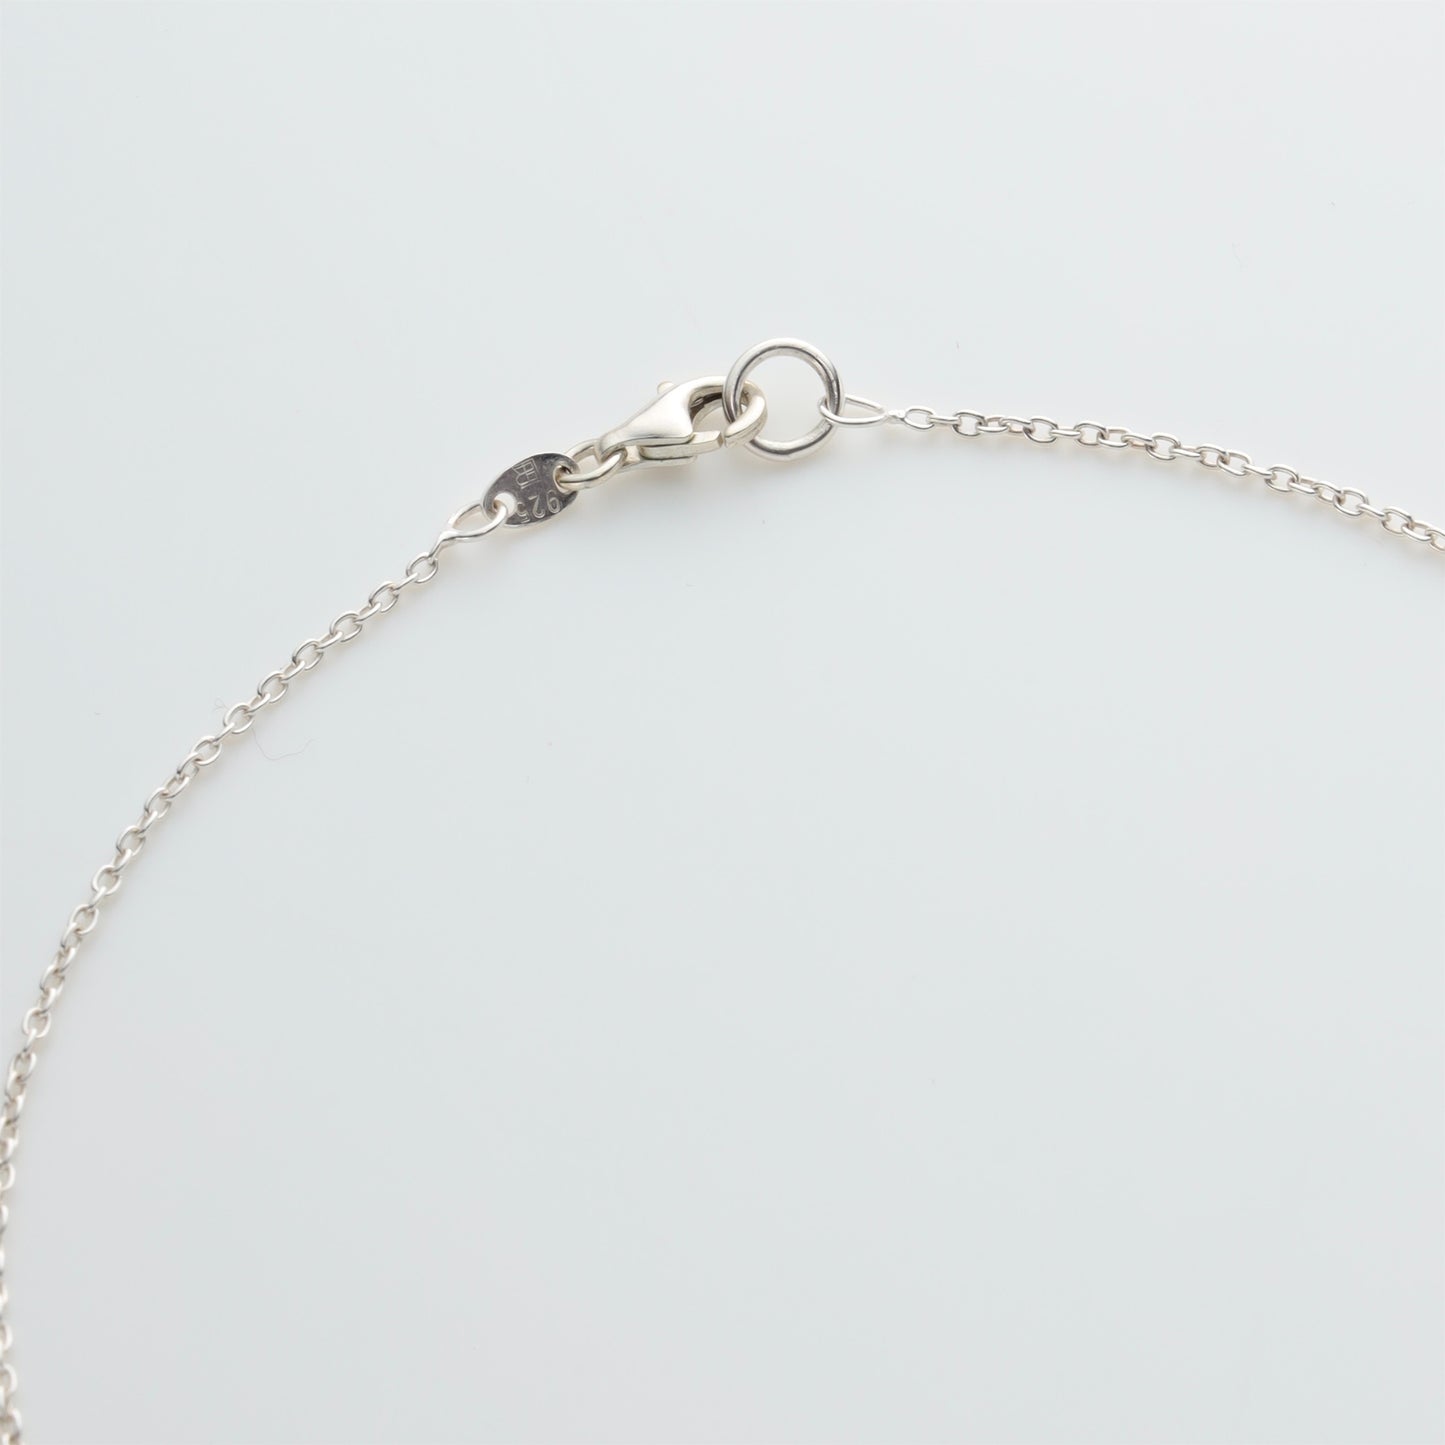 SPECIAL PRICE 【Aurore de Heusch】ネックレス Necklace Bons Baisers from feelseen